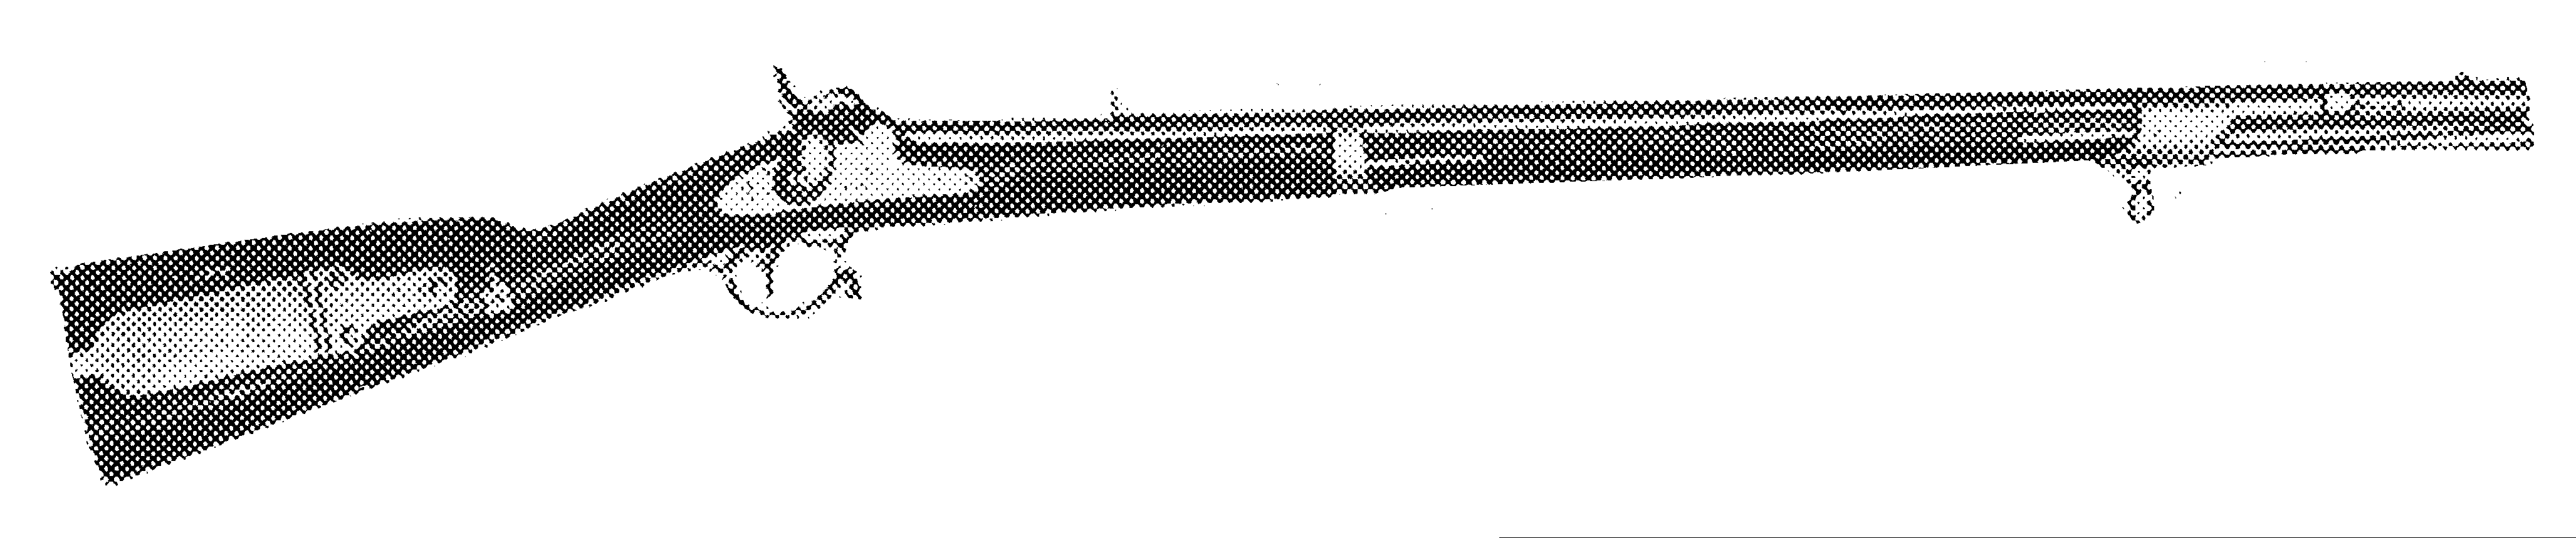 Whitney U.S. M1841/1855 Contract Rifle, Adapted to Saber Bayonet and Long Range Sights